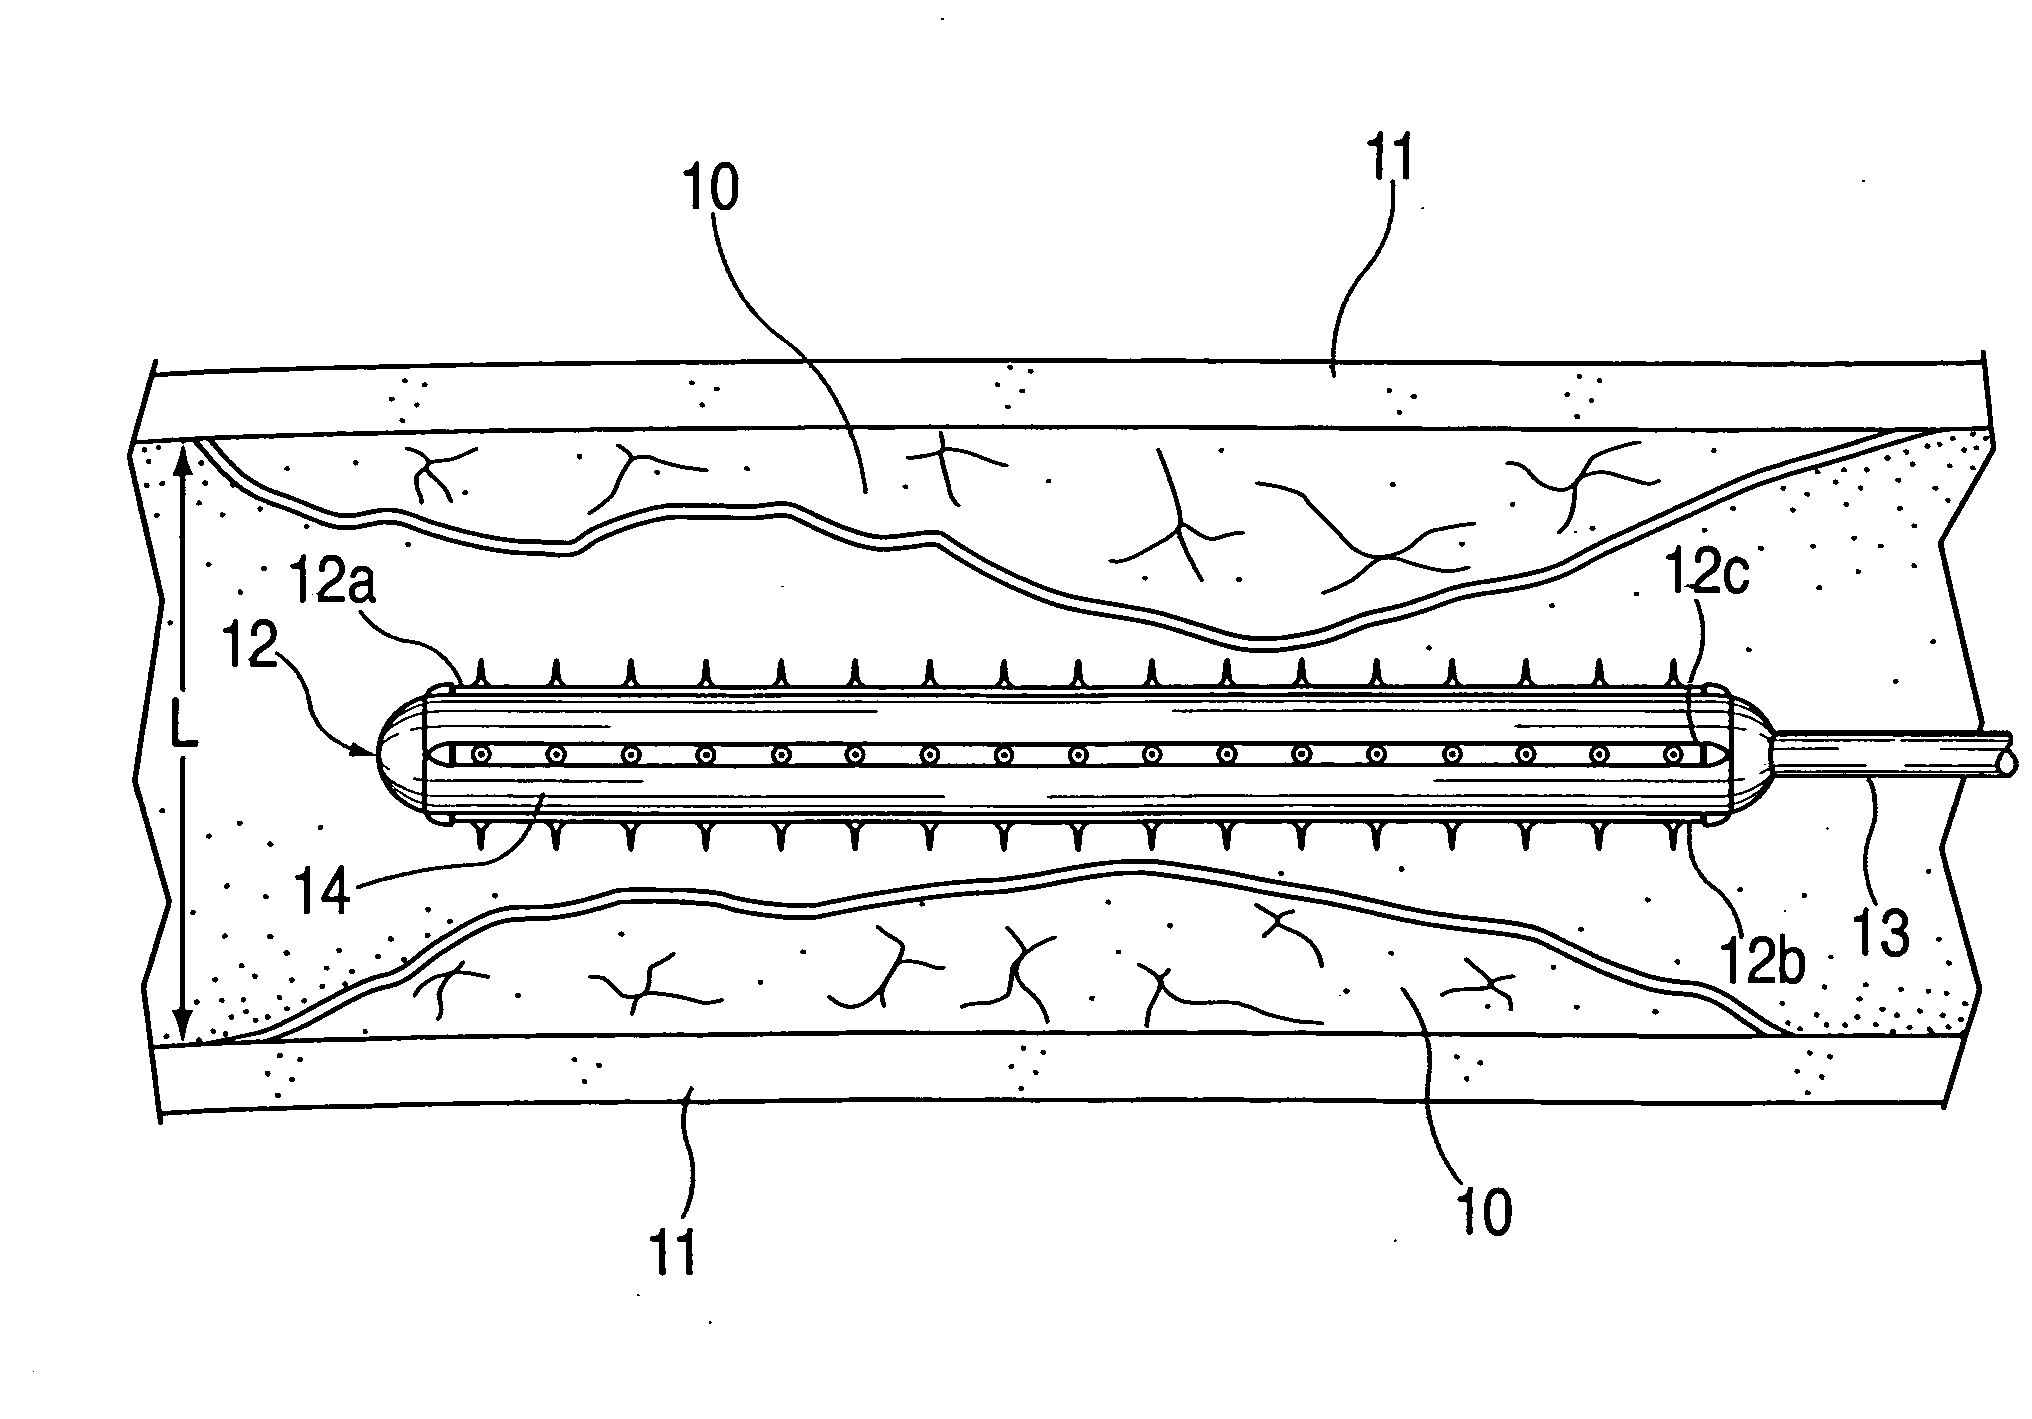 Device and method for opening blood vessels by pre-angioplasty serration and dilatation of atherosclerotic plaque